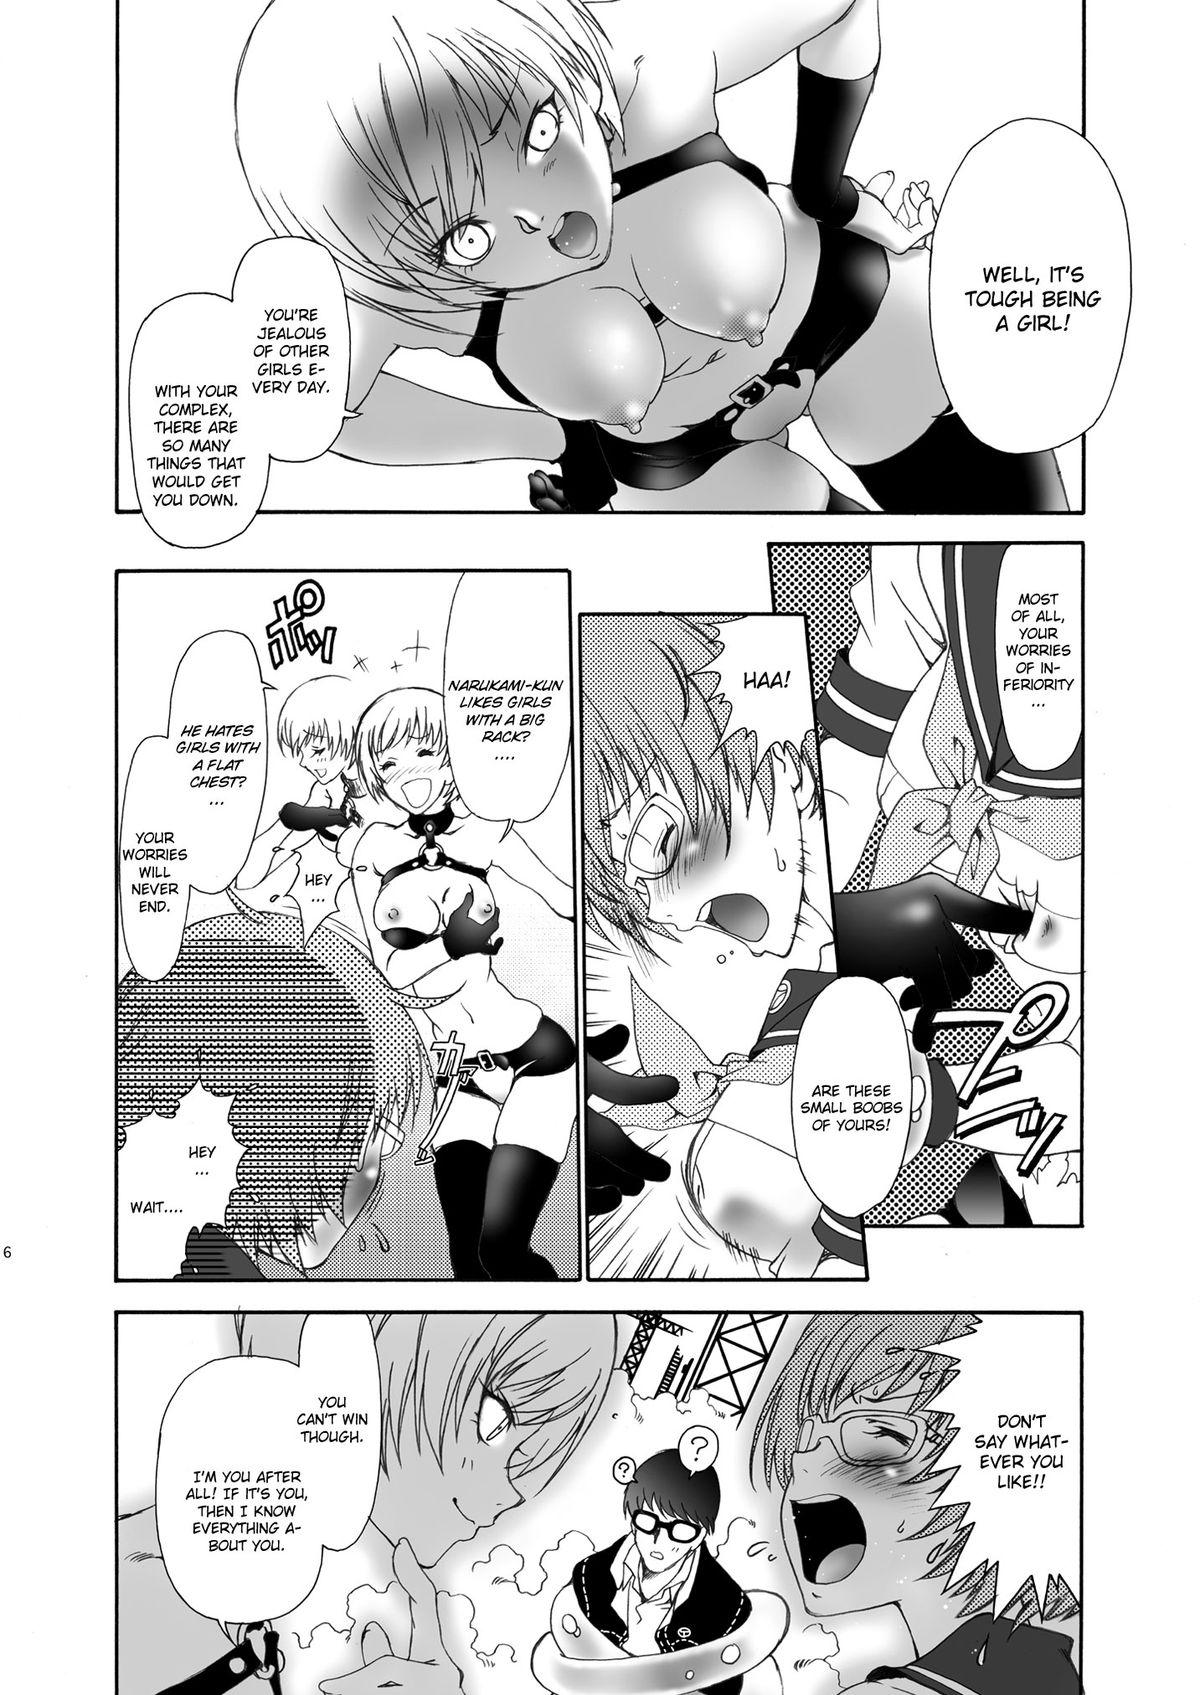 Missionary Ron't - Persona 4 Femdom Porn - Page 6